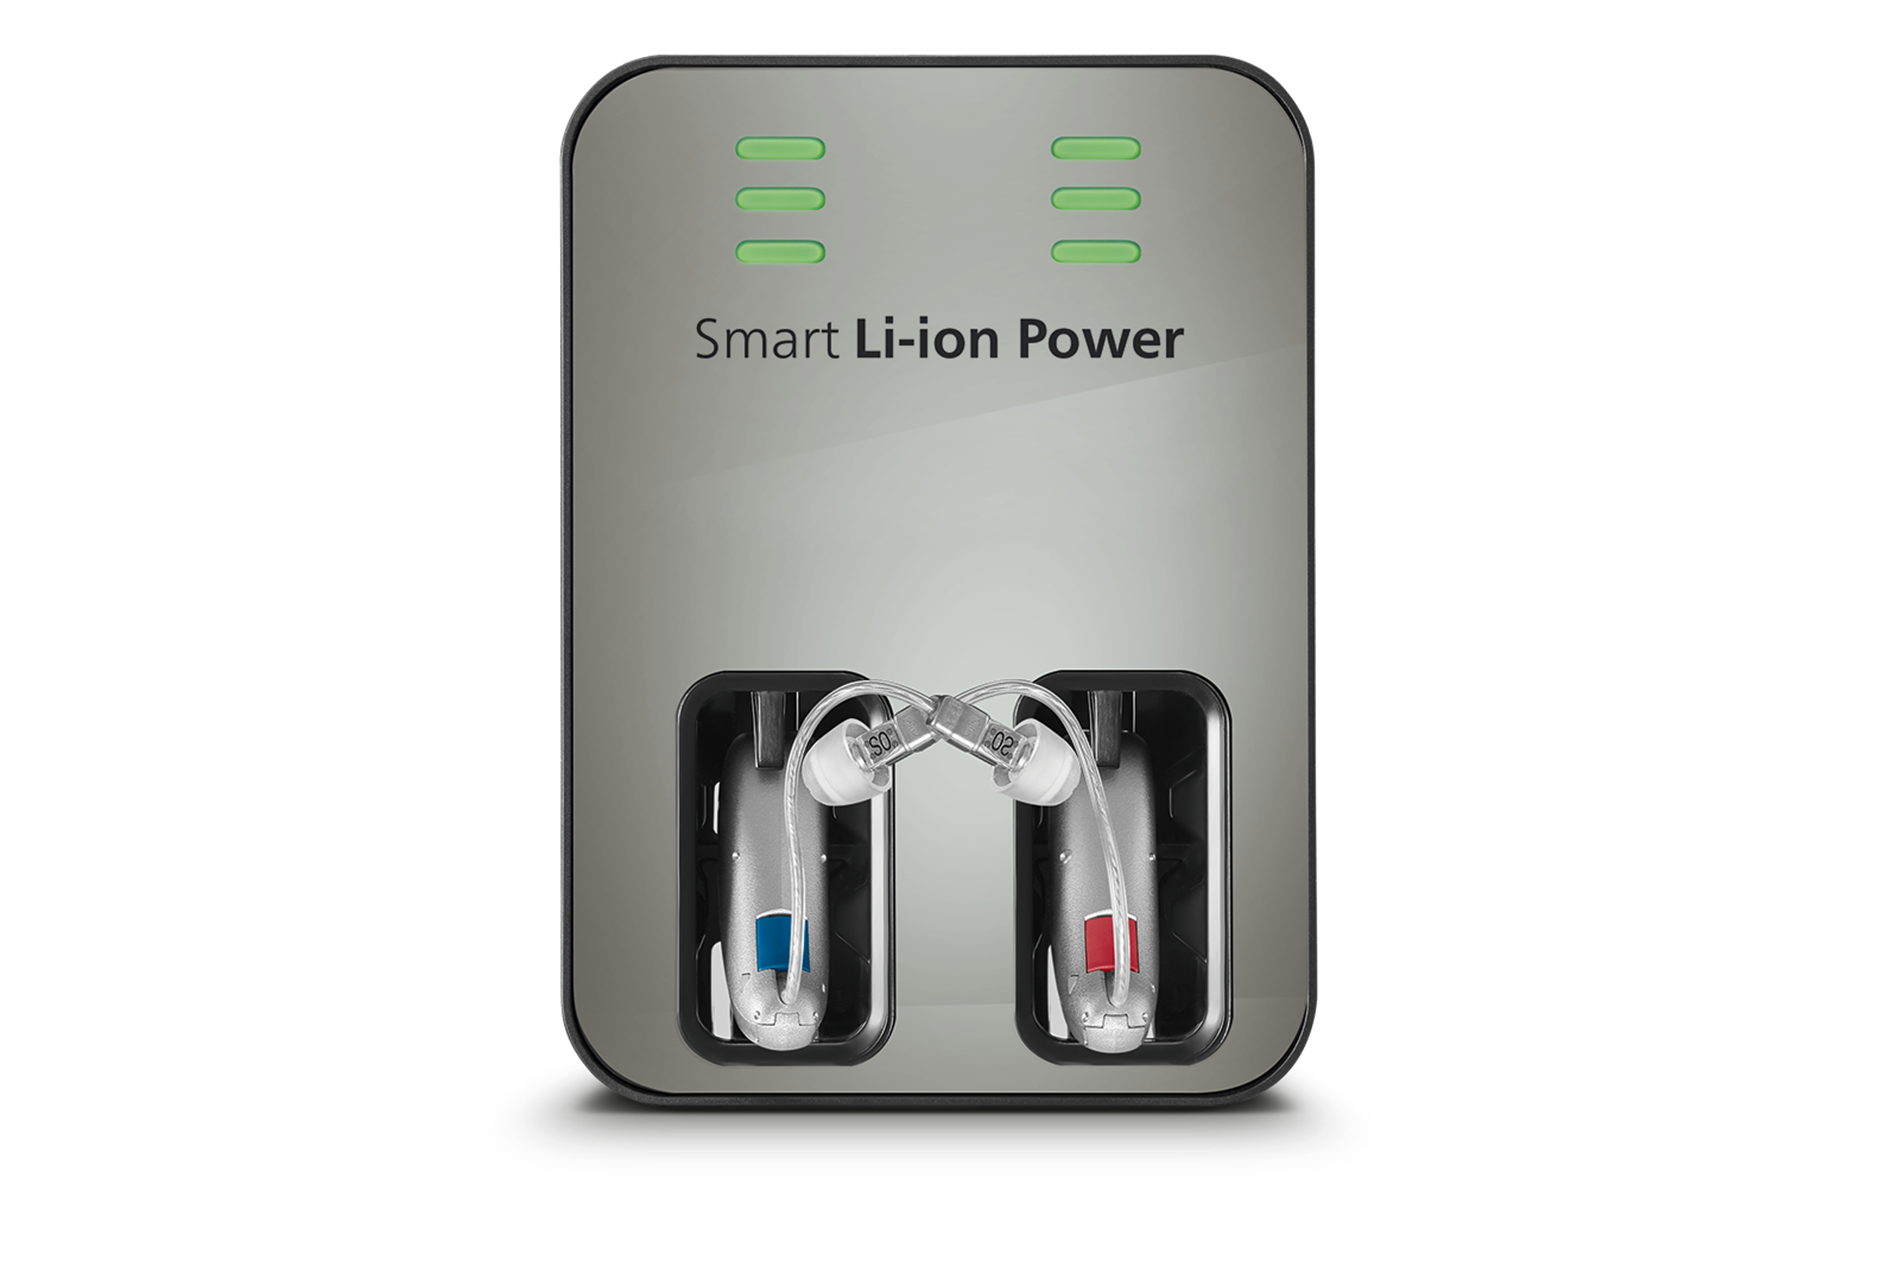 Smart-LiIon-Power-Charger_1600x1067